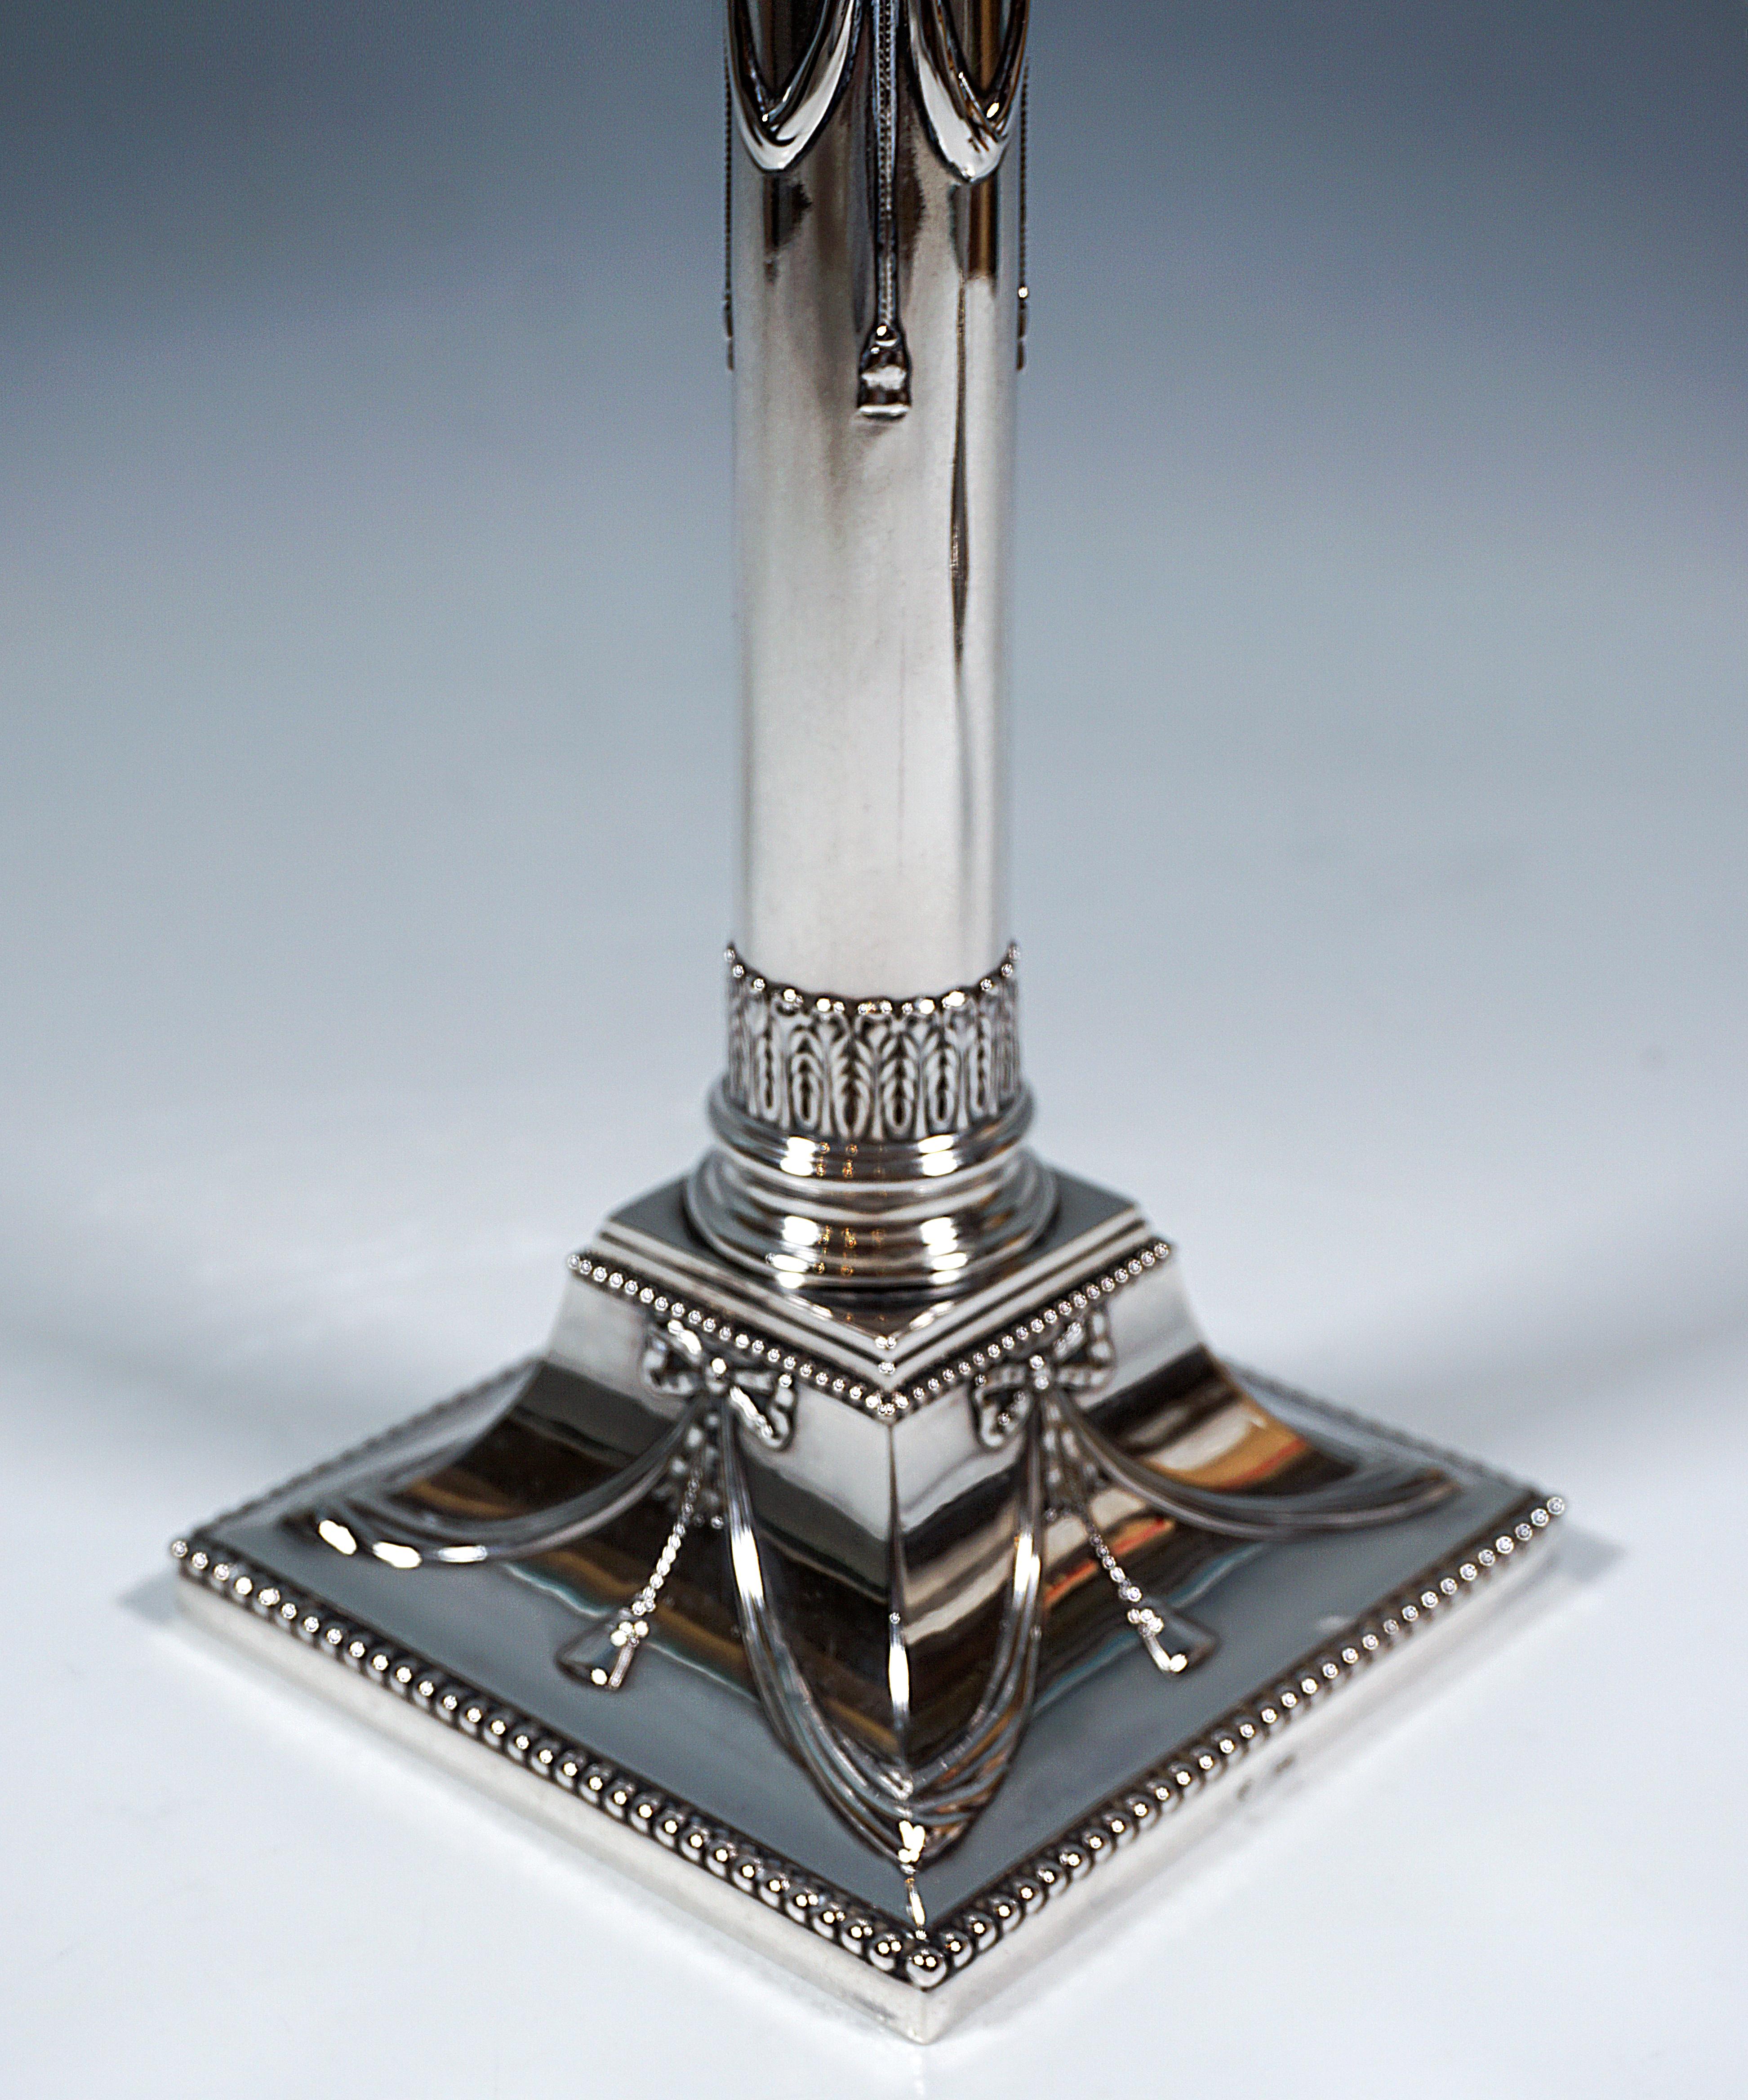 Pair of Art Nouveau Silver Candle Holders, by J.M. Van Kempen, Netherlands, 1900 For Sale 1